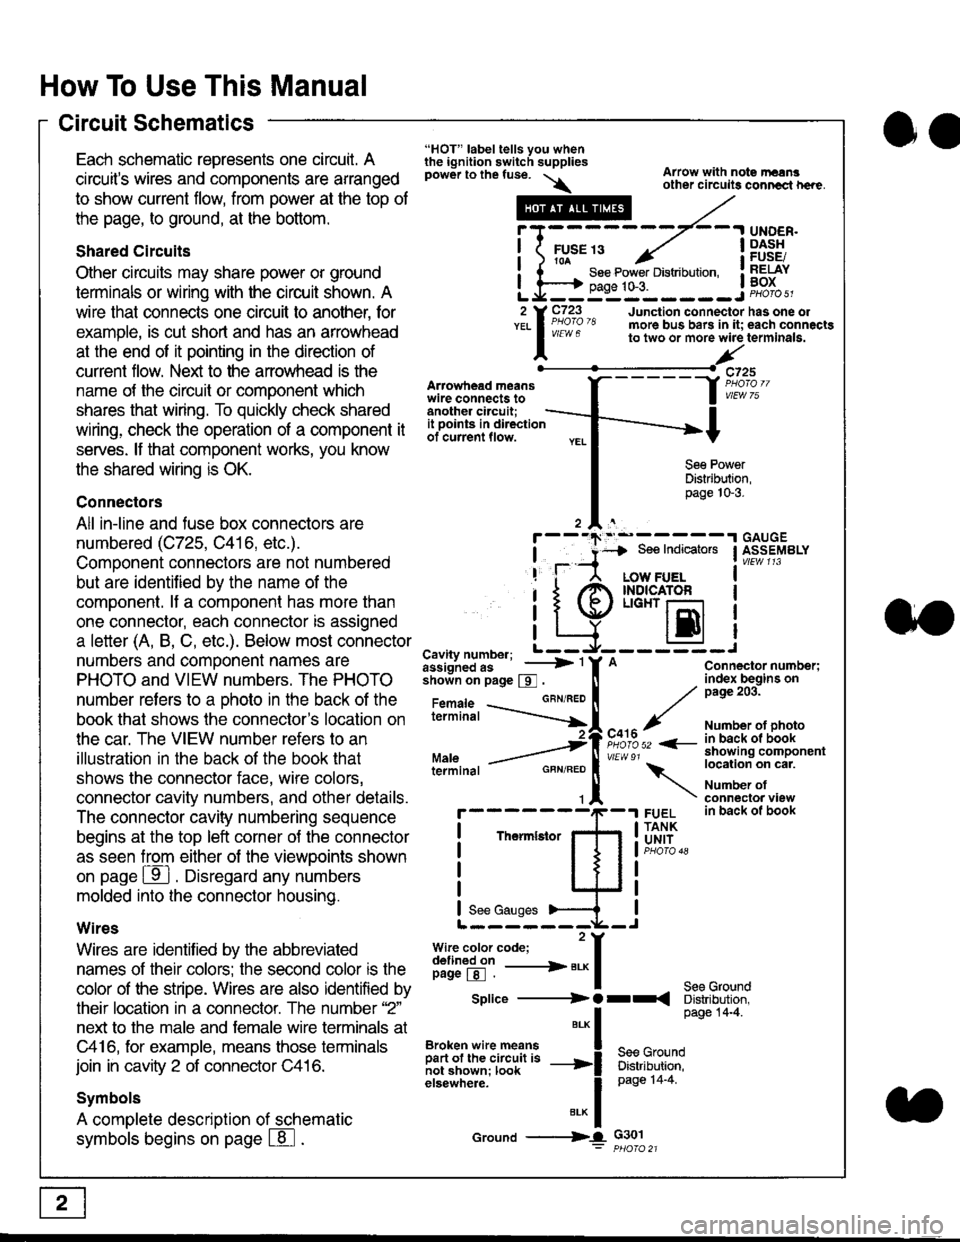 HONDA CIVIC 1999 6.G Workshop Manual How To Use This Manual
Circuit Schematics
oa
Each schematic represents one circult. A
circuits wires and components are arranged
to show current flow, from power at the top of
the page, to ground, at